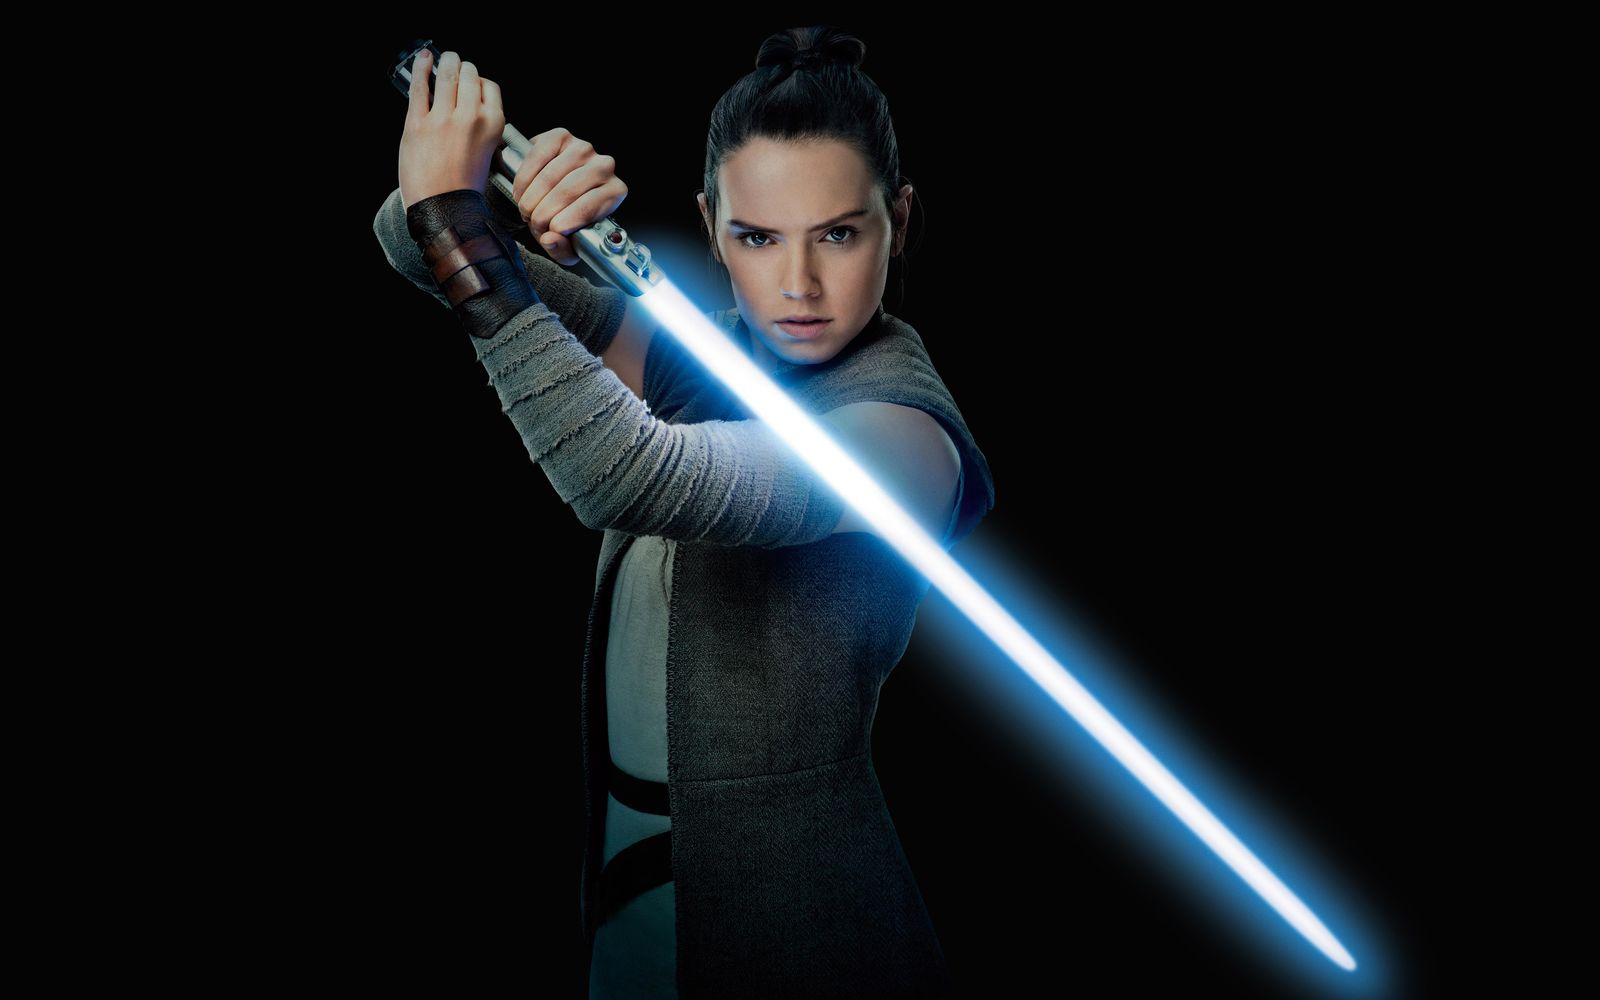 Daisy Ridley Talks About Her Role In The Star Wars Franchise